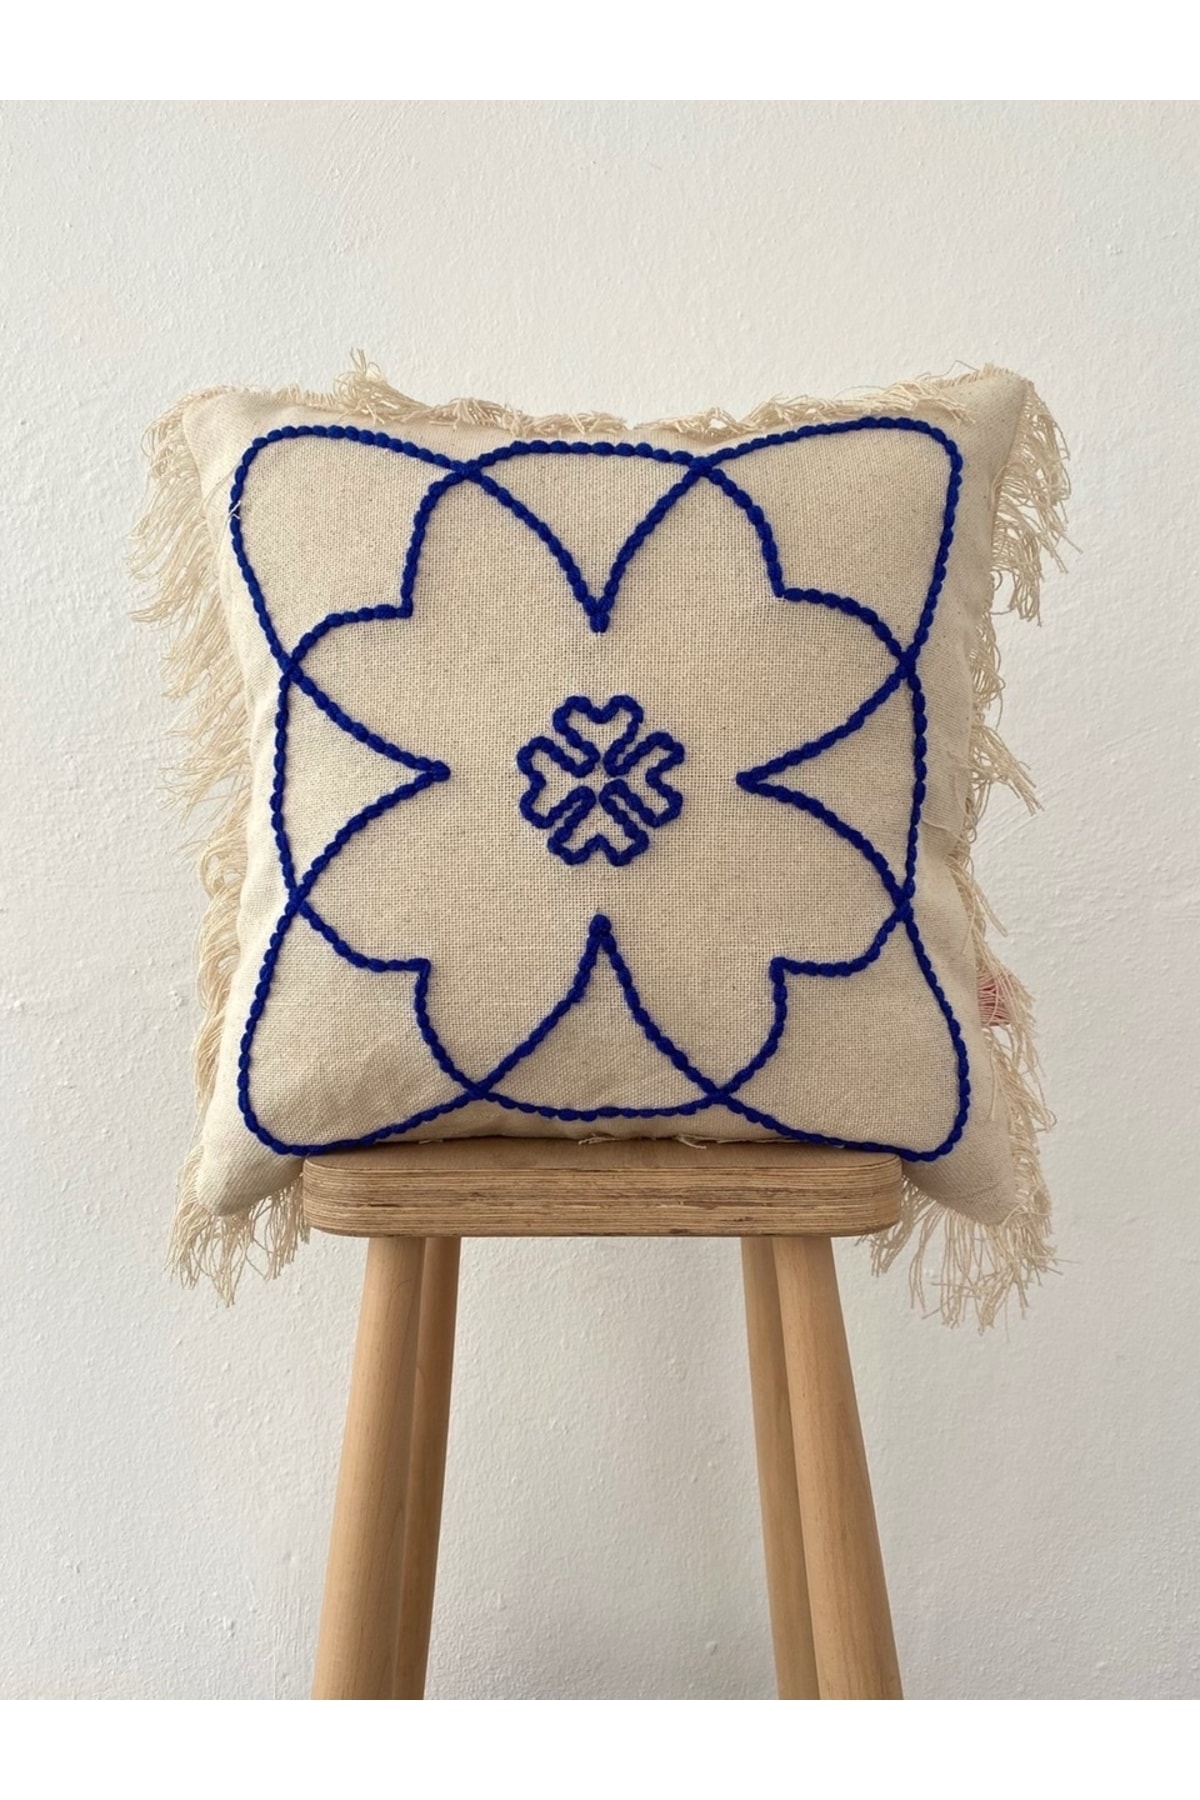 Blue Bohemian Punch Cushion Pillow Cover with Linen Tassels